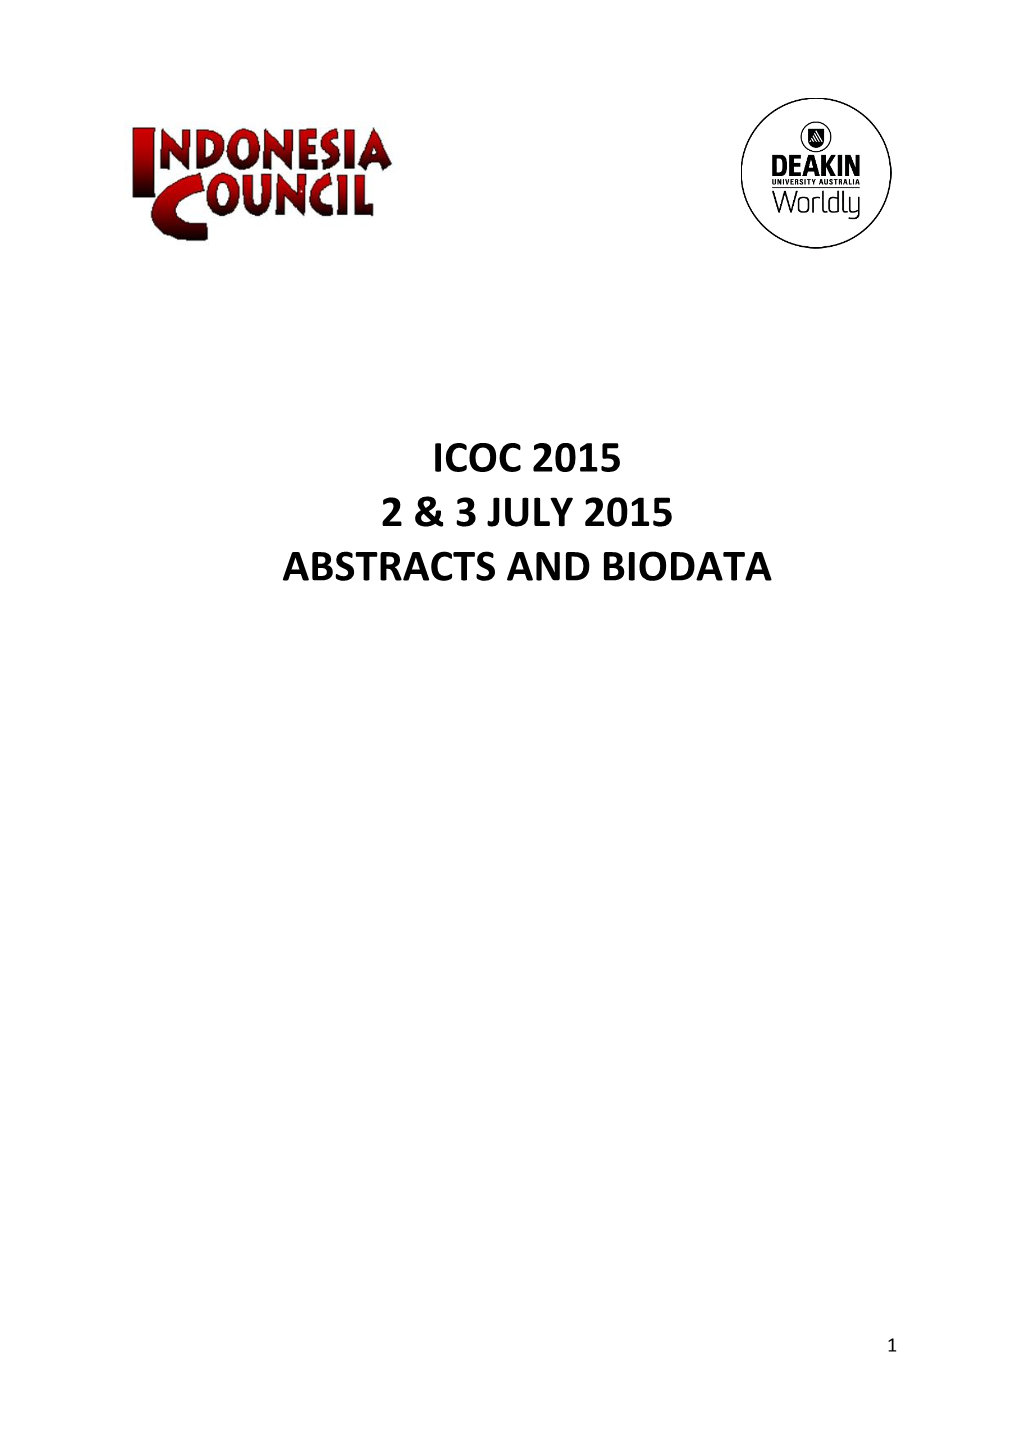 Icoc 2015 2 & 3 July 2015 Abstracts and Biodata